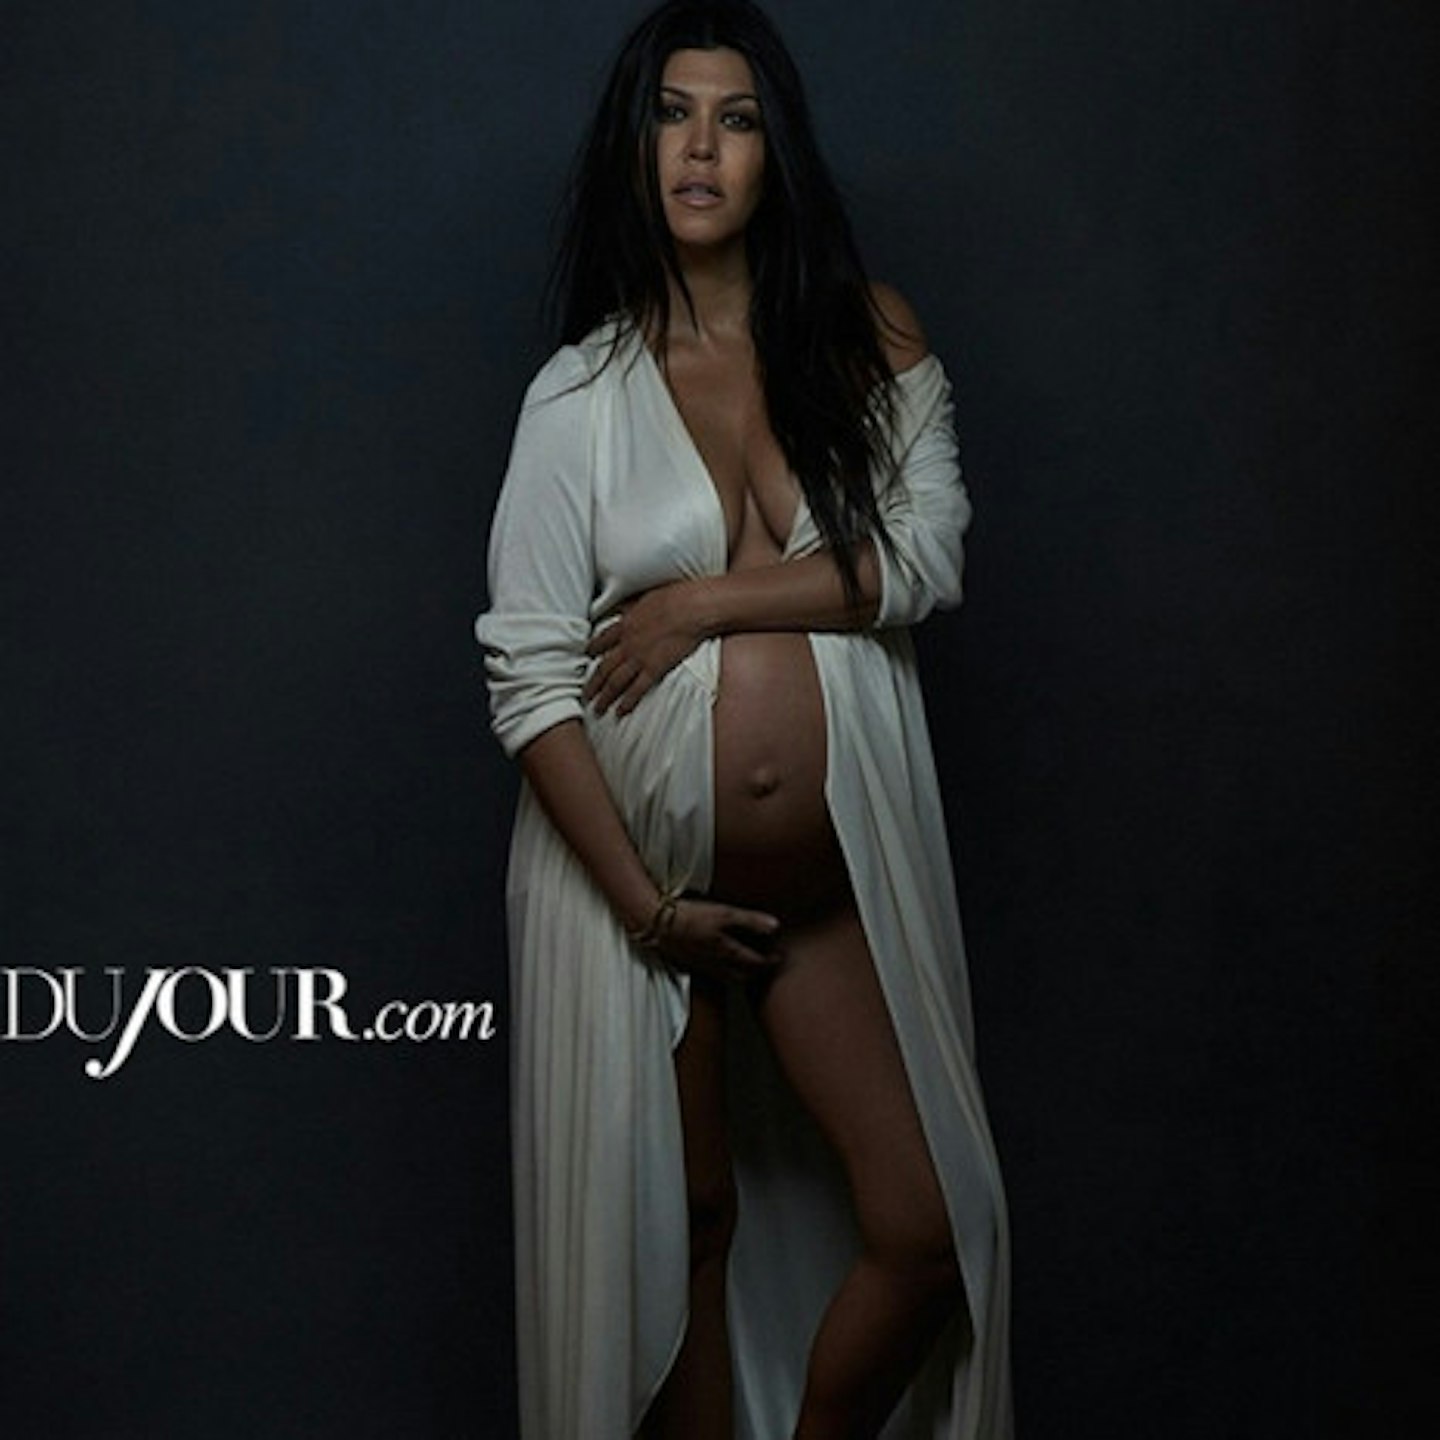 Kourtney says she's at her best when pregnant